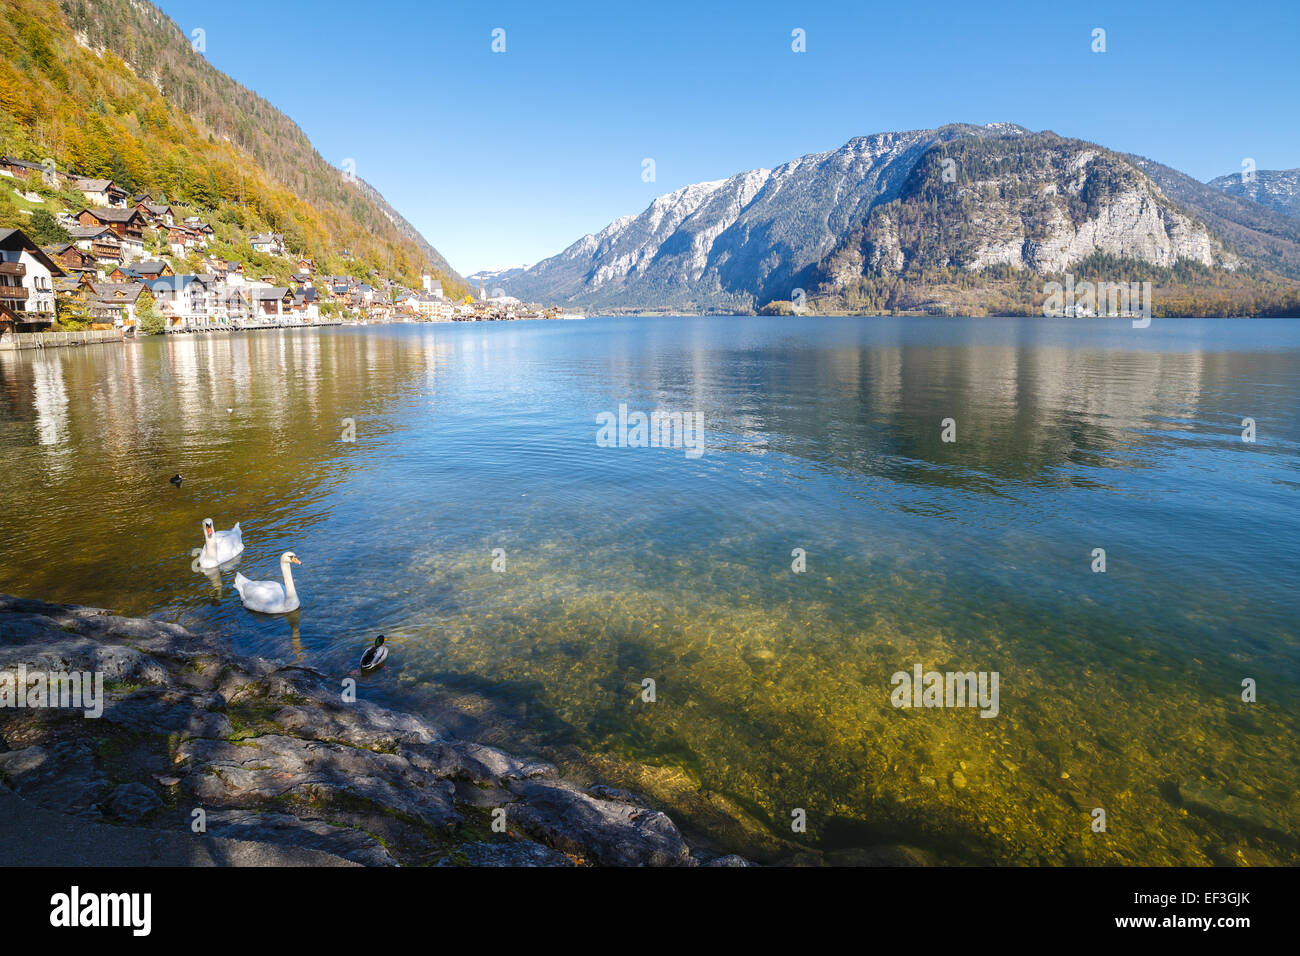 Swans floating in the lake illuminated by the morning sun Stock Photo